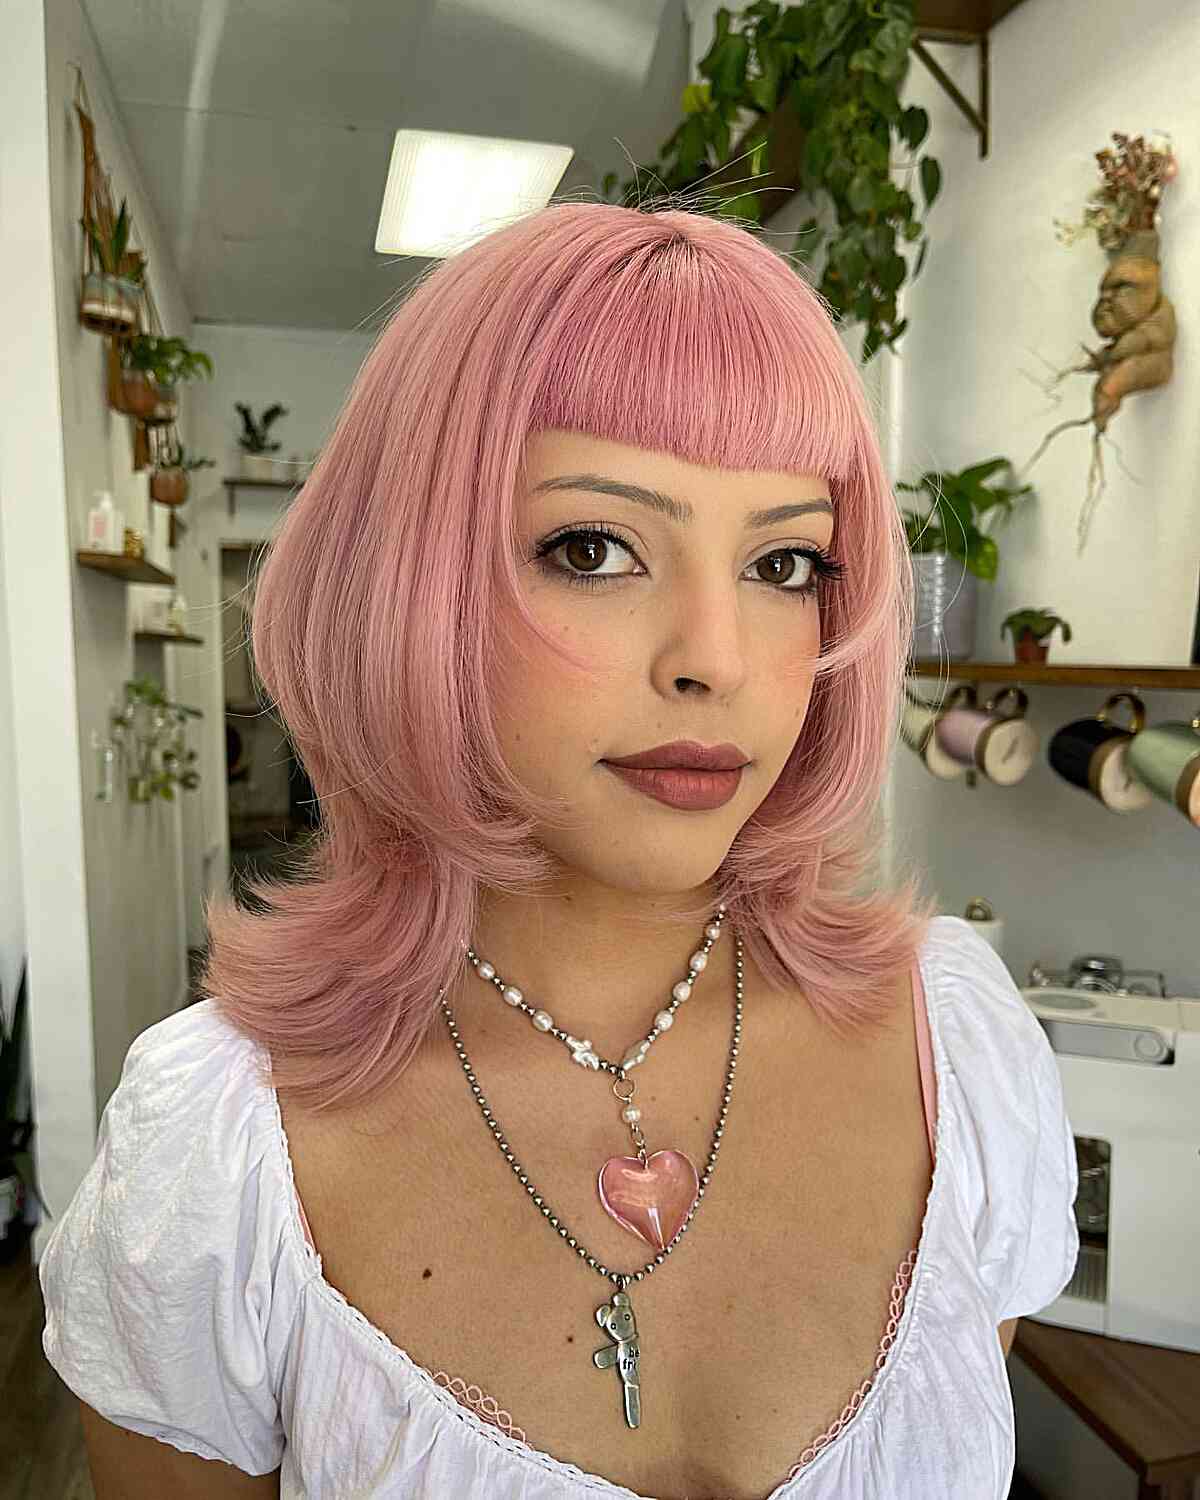 Cotton Candy Jellyfish Hairstyle for ladies with straight hair